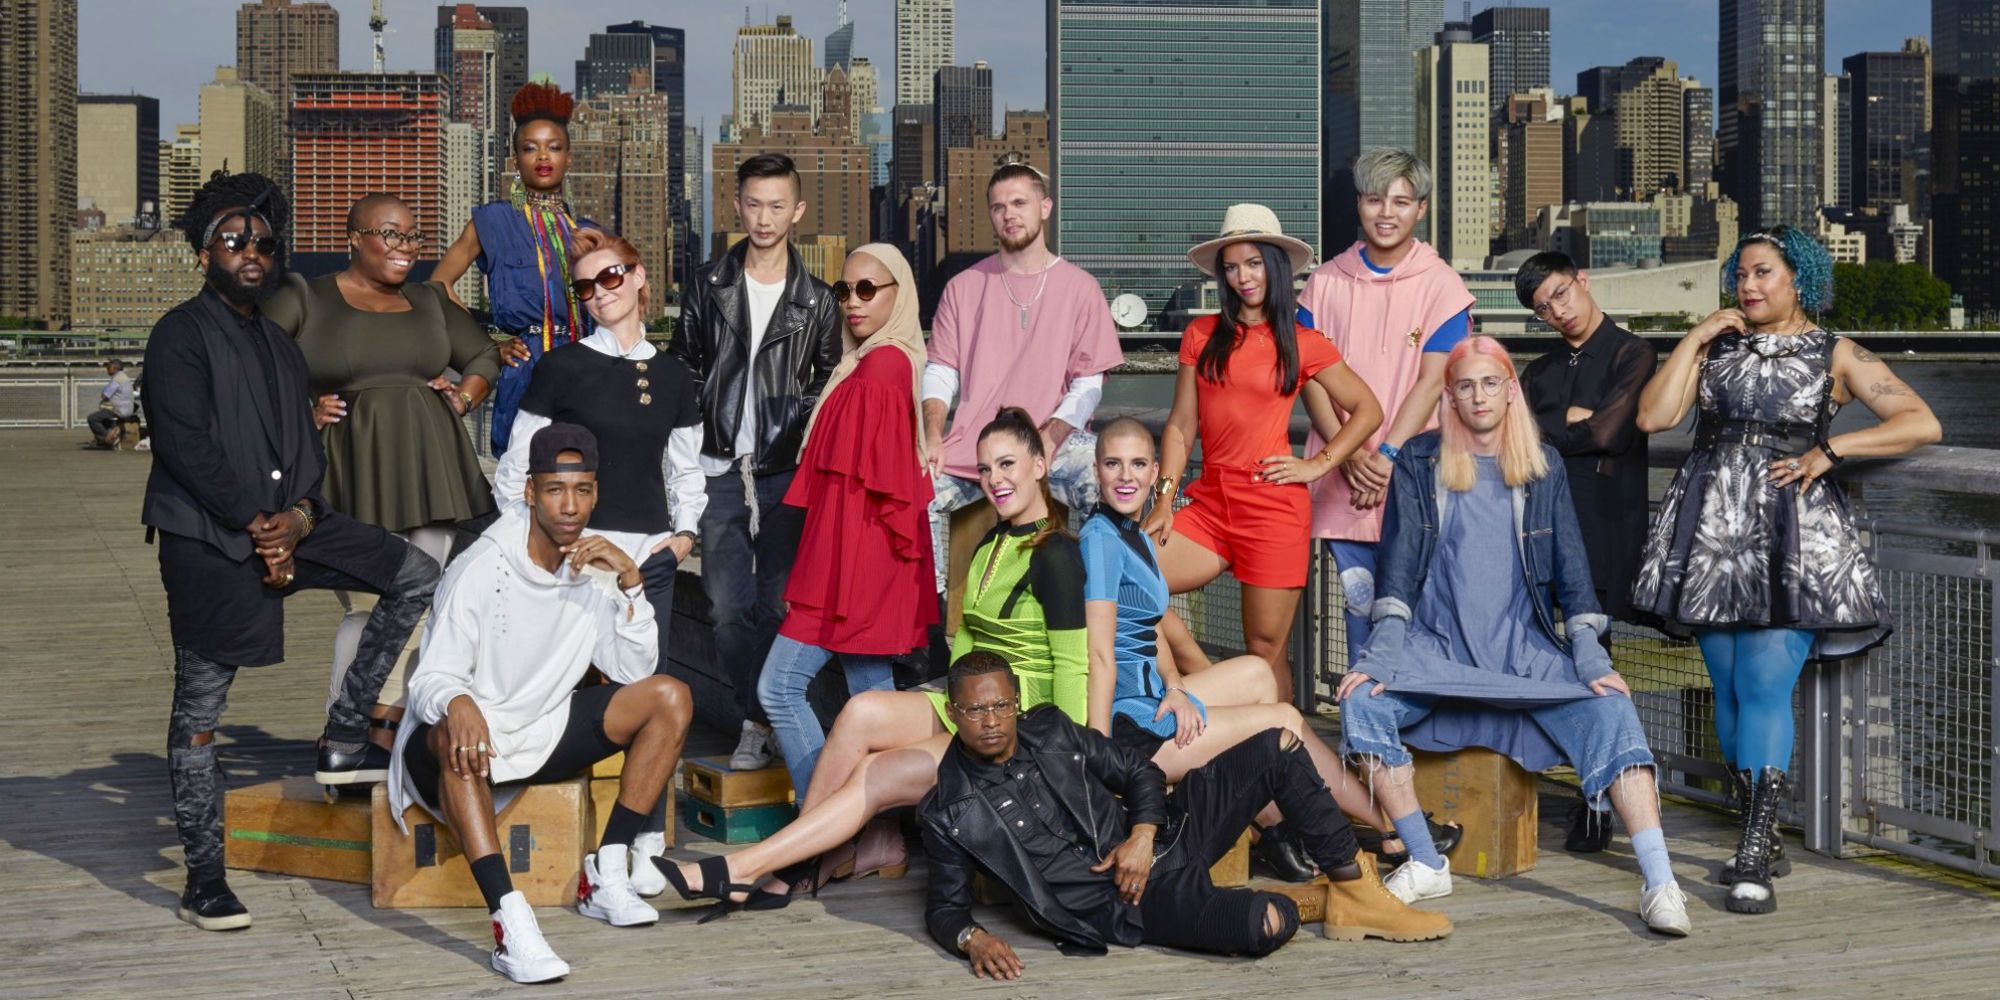 Project Runway: Season 16's Cheating Scandal Explained